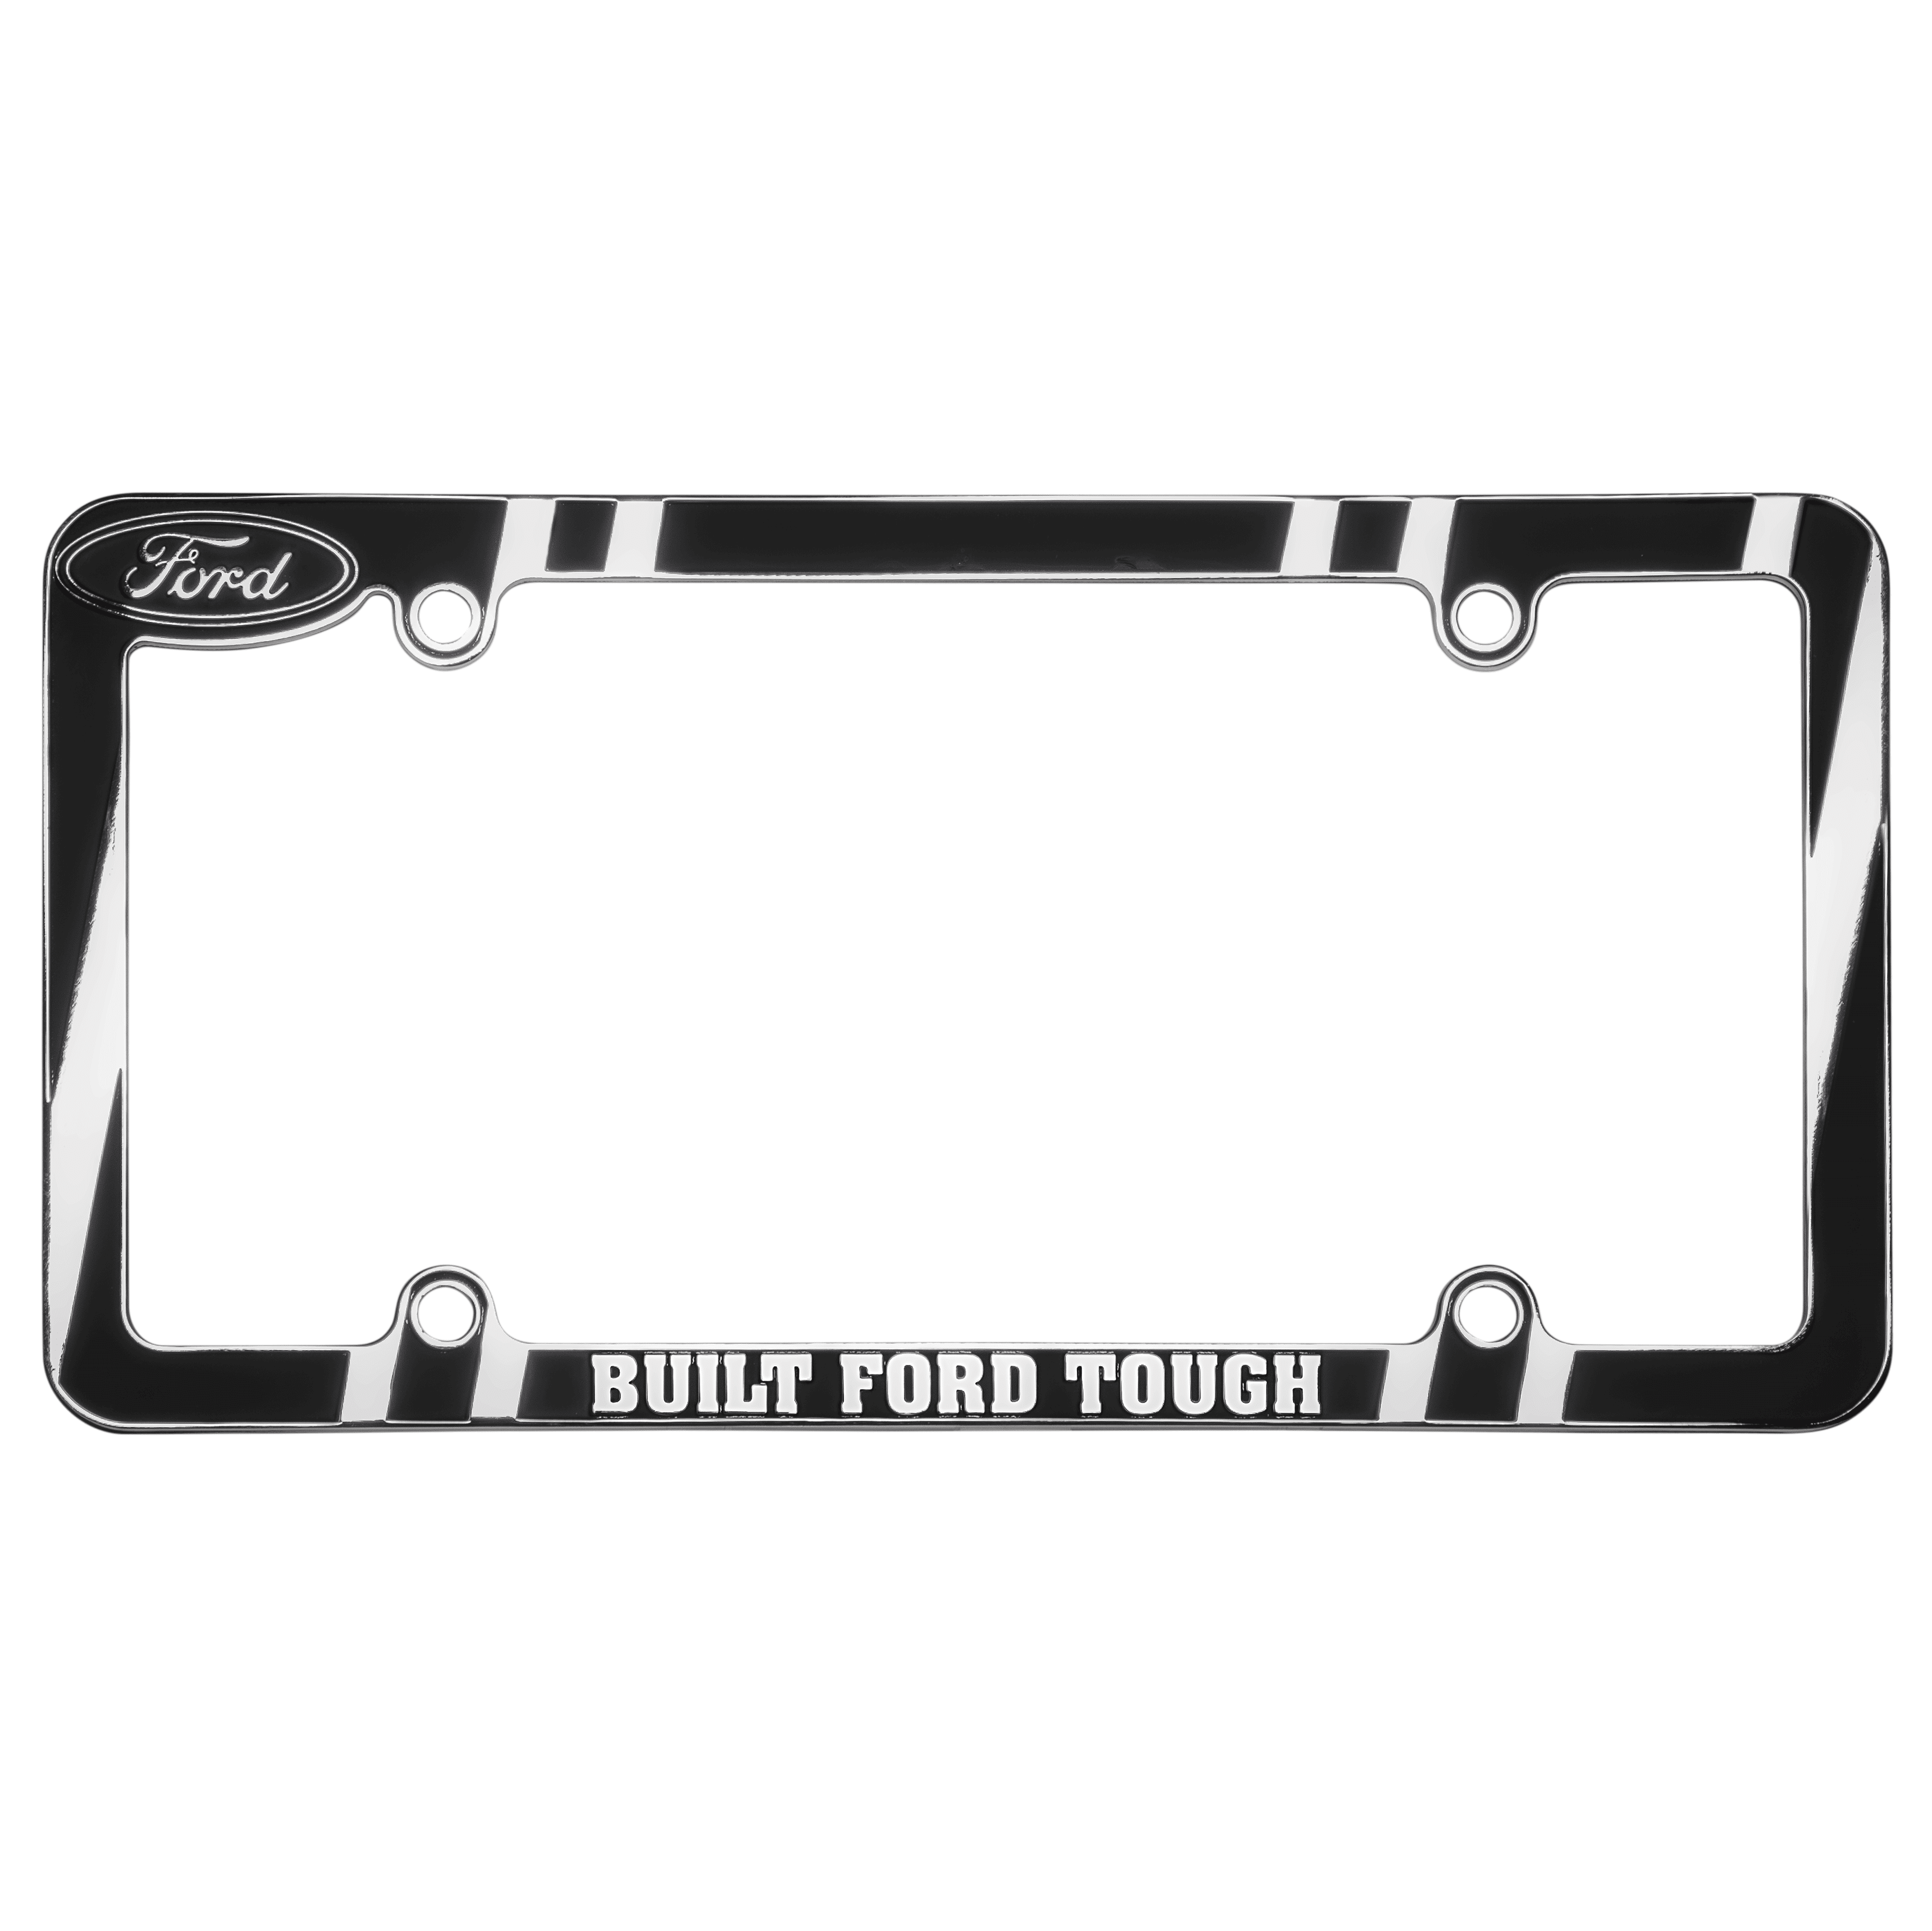 Chrome License Plate Frame I'D RATHER BE EATING DONUTS Auto Accessory